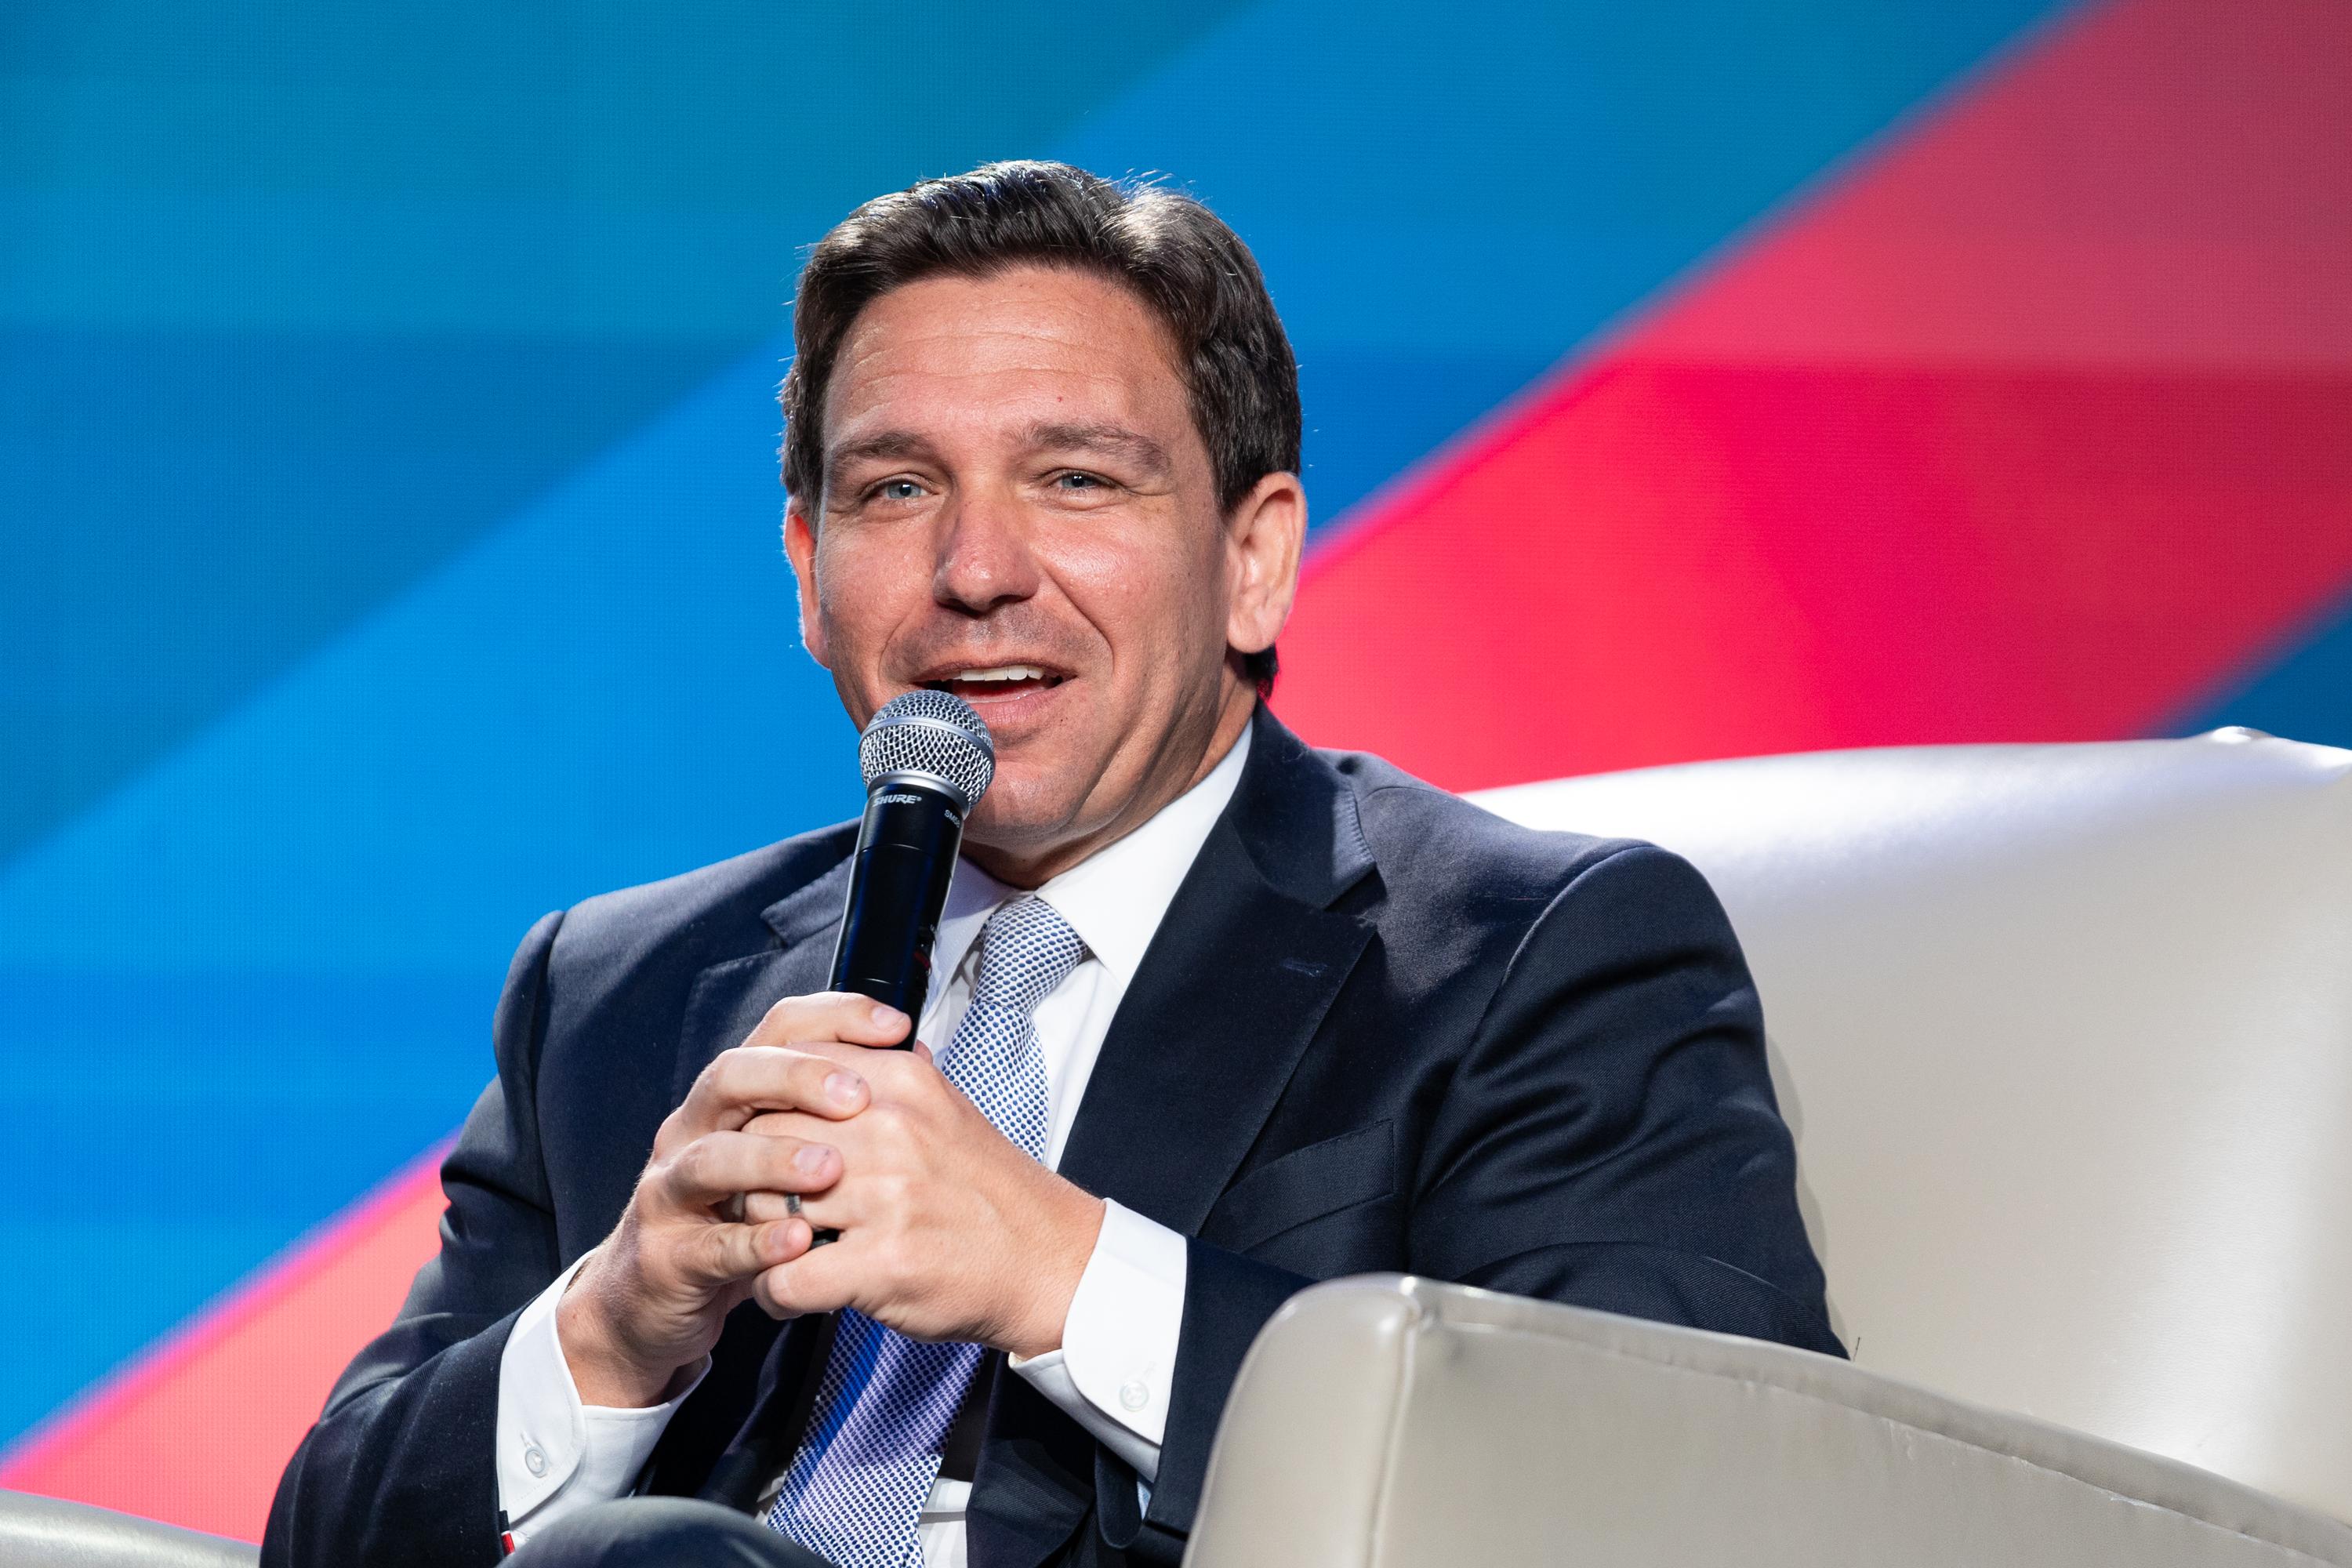 The Slatest for Aug. 23: The GOP Primary Debate Could Be DeSantis’ Big Chance Slate Staff